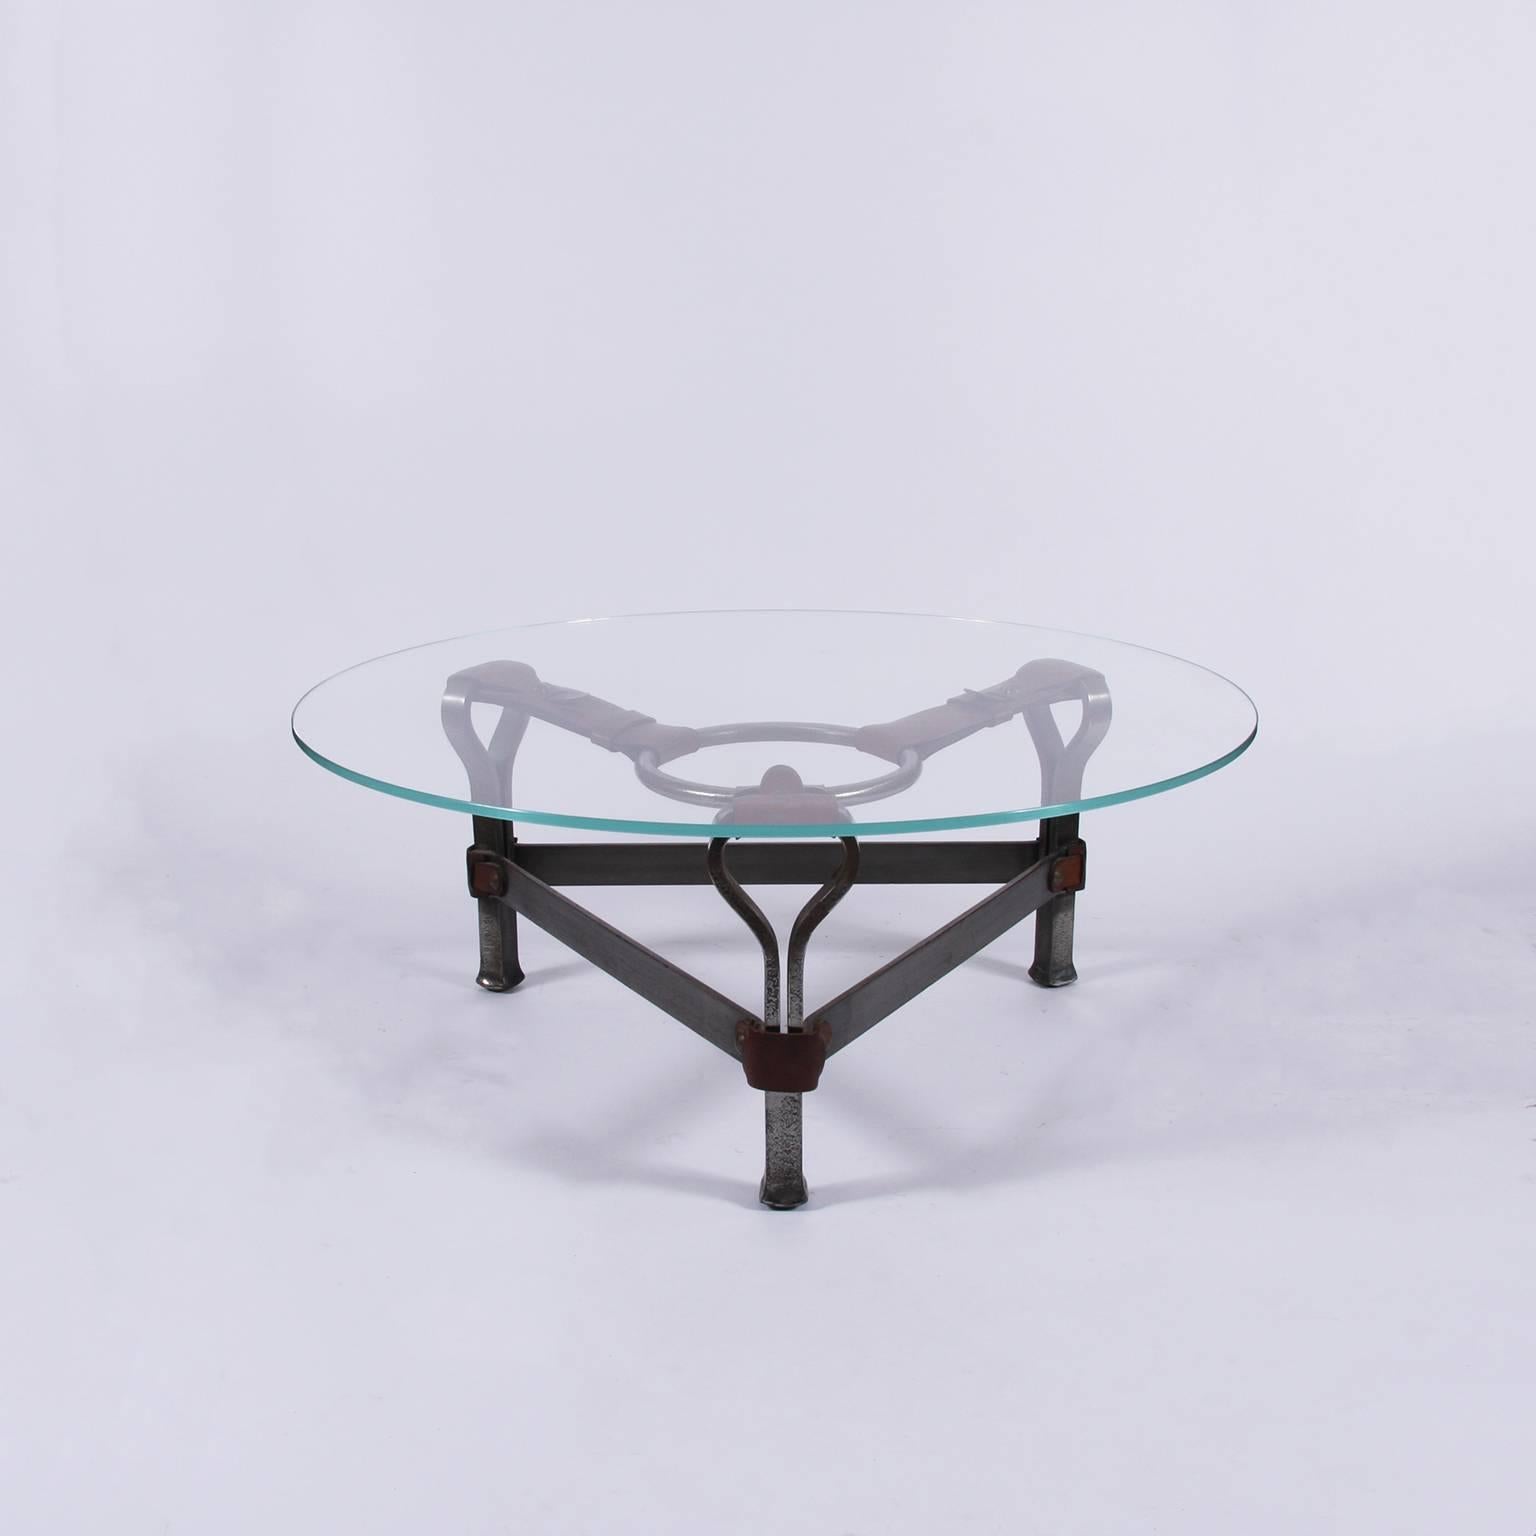 An unusual small coffee table with a wrought iron and leather base with a circular glass top.